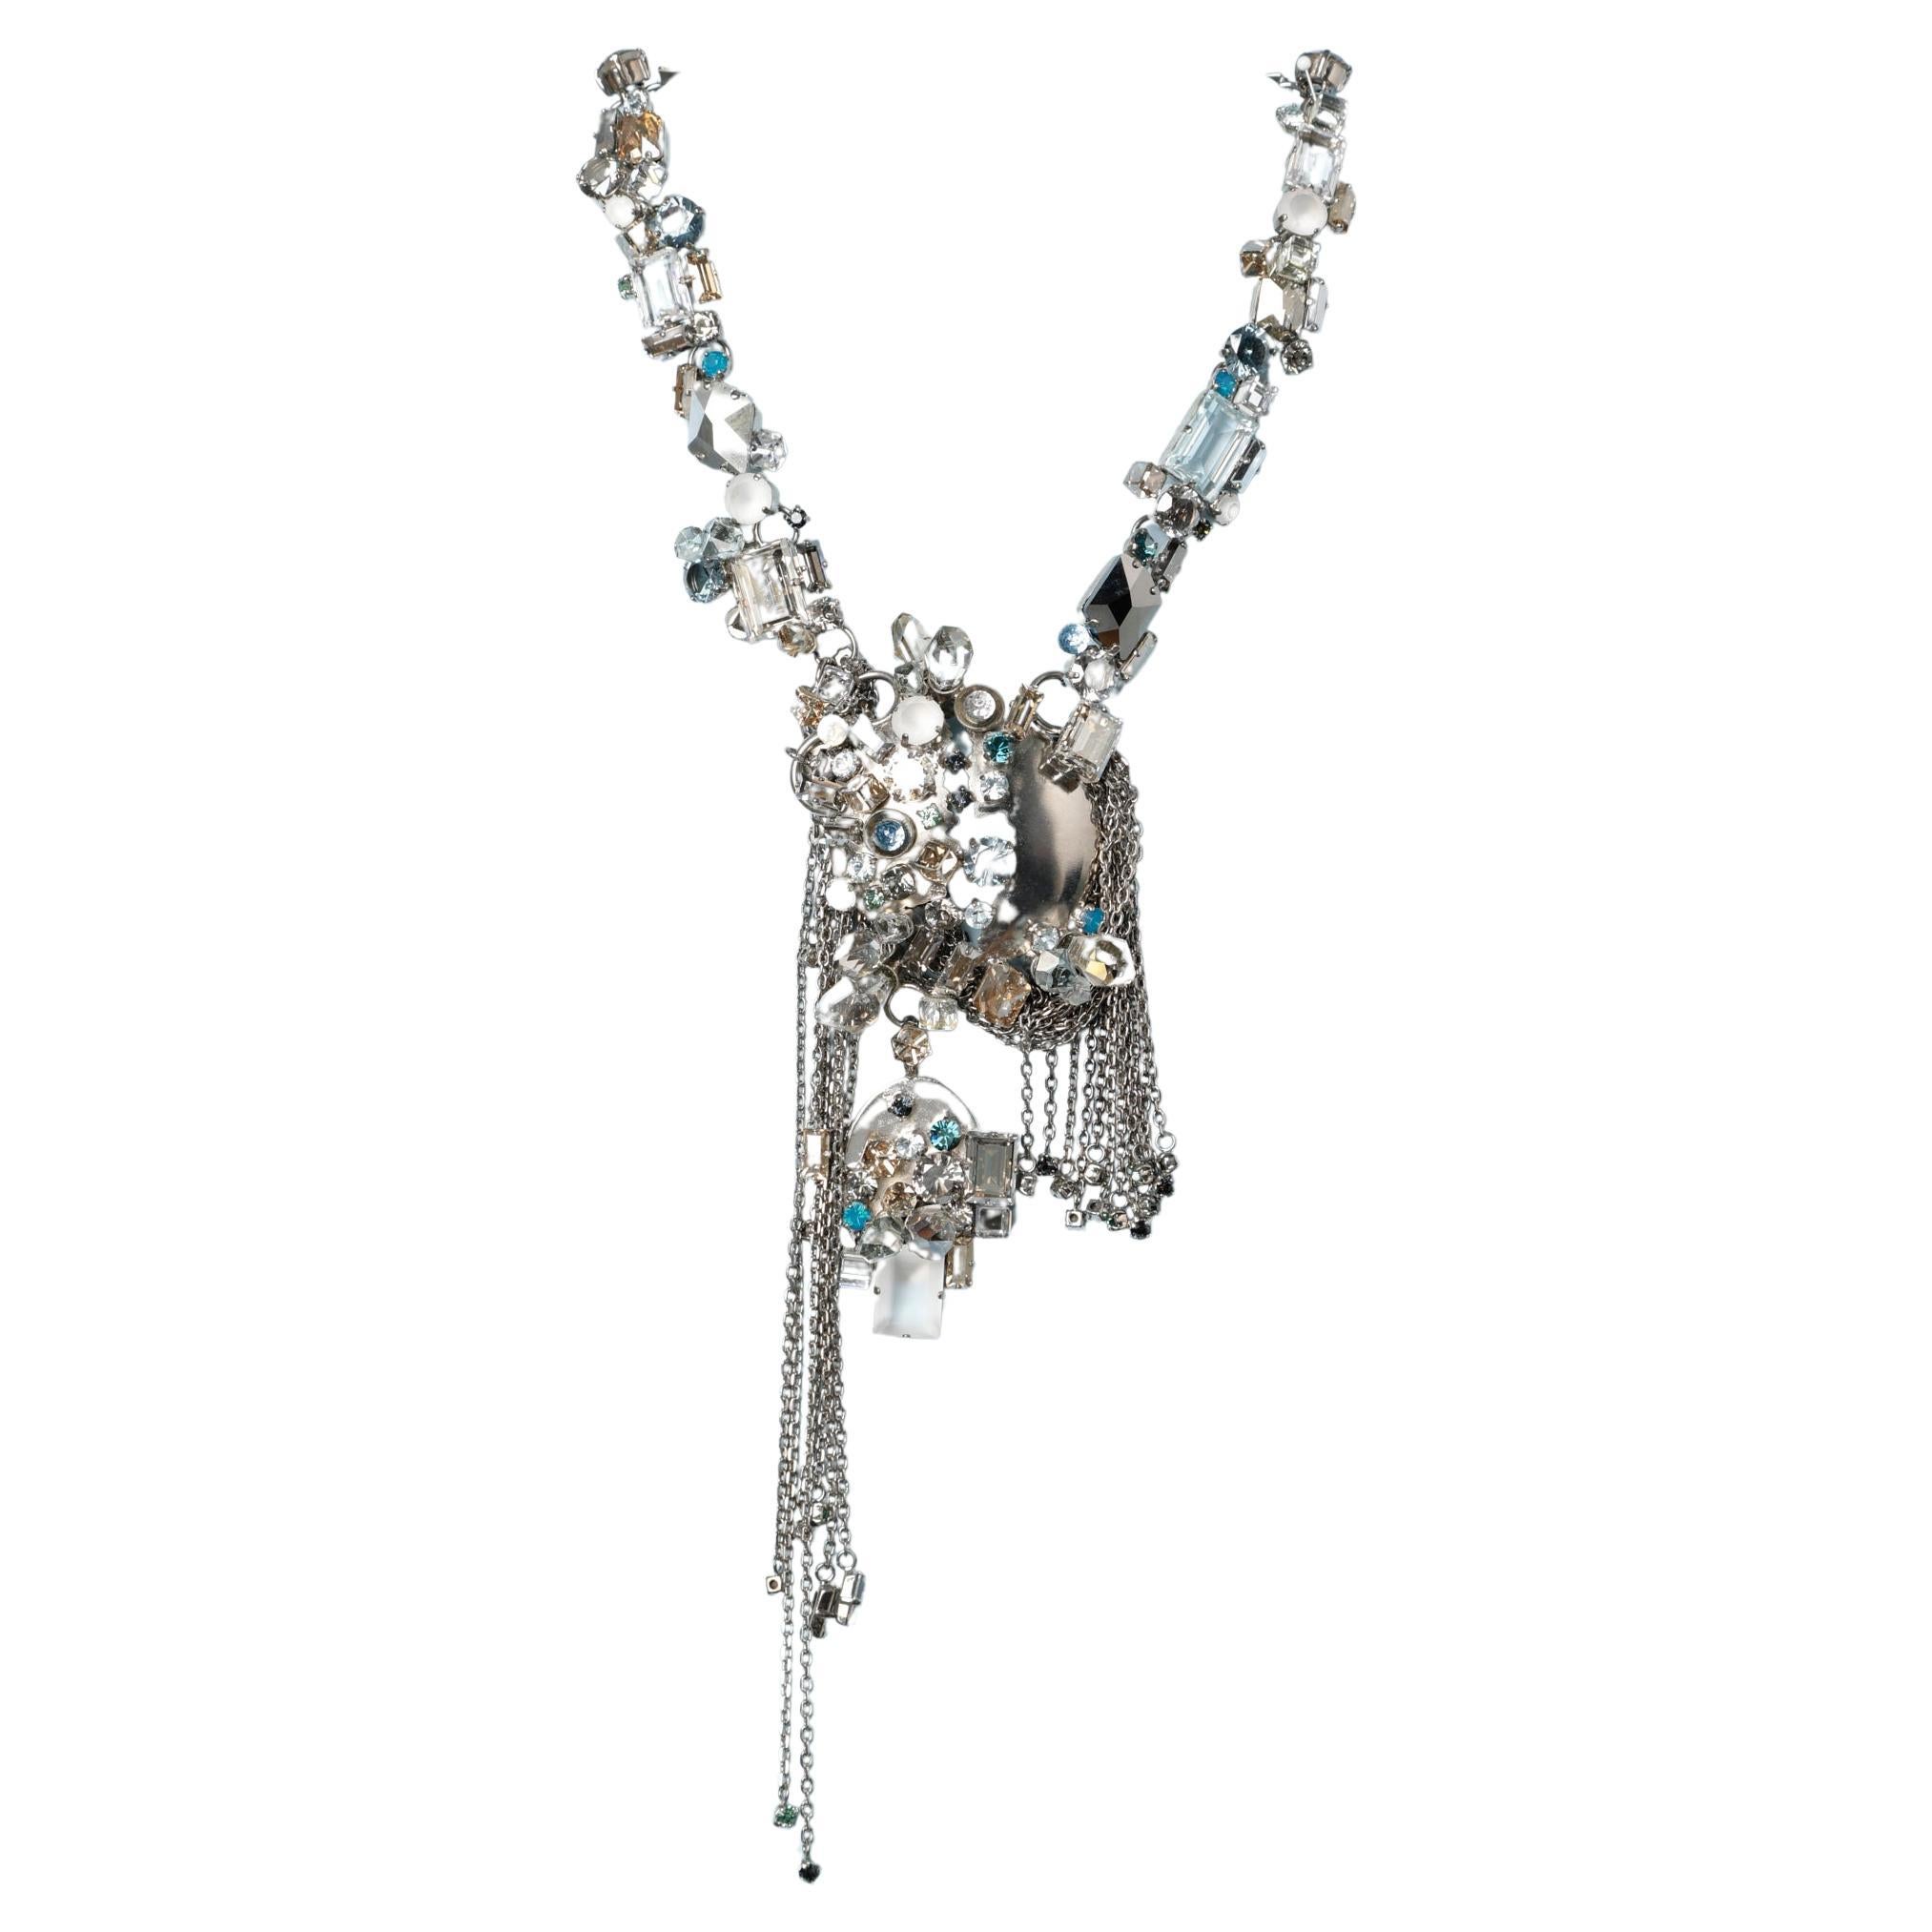 Drop necklace made of metal, chain, rhinestone and glass beads Circa 2010 For Sale